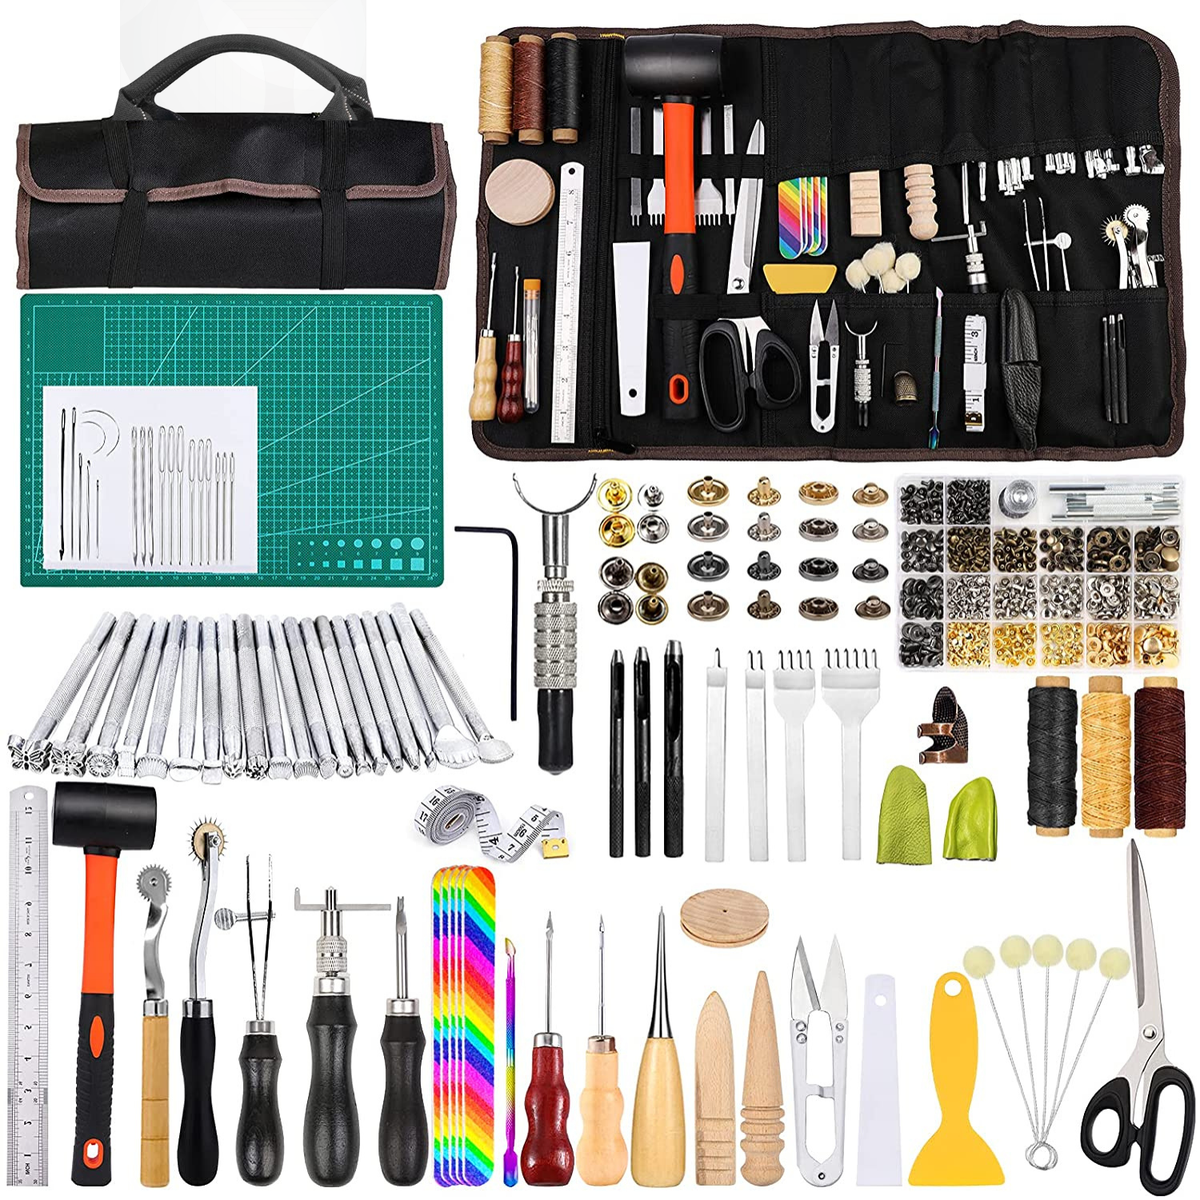 Leathercraft Tools 18piece Set Kit Leather Working Project 